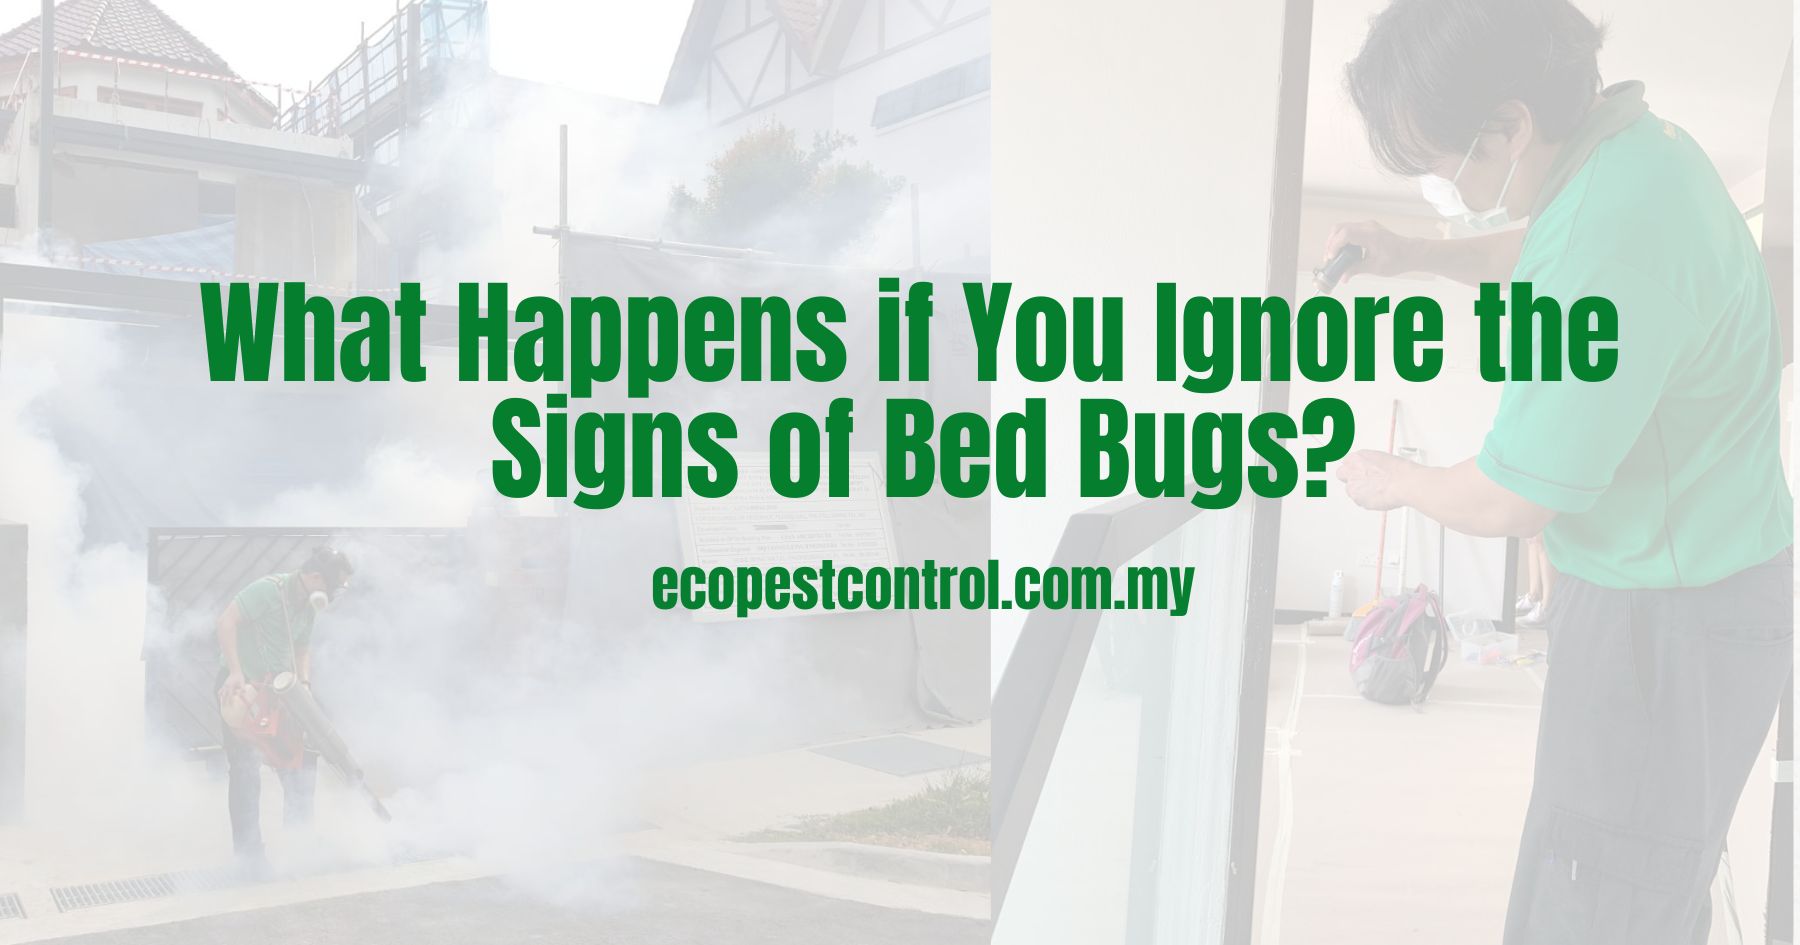 What Happens if You Ignore the Signs of Bed Bugs?